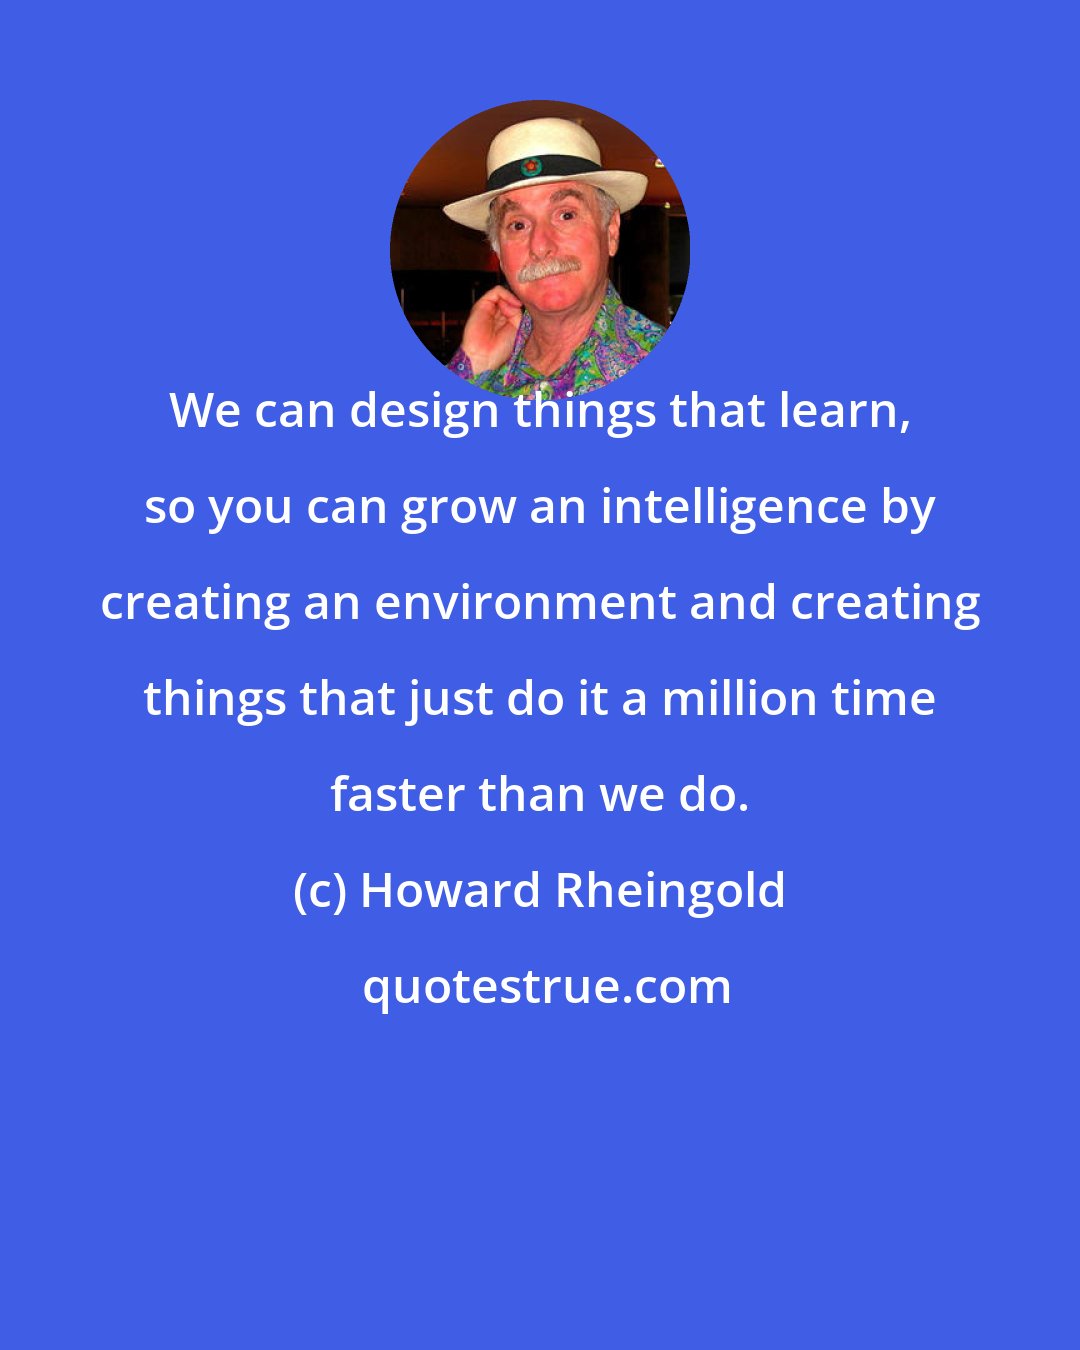 Howard Rheingold: We can design things that learn, so you can grow an intelligence by creating an environment and creating things that just do it a million time faster than we do.